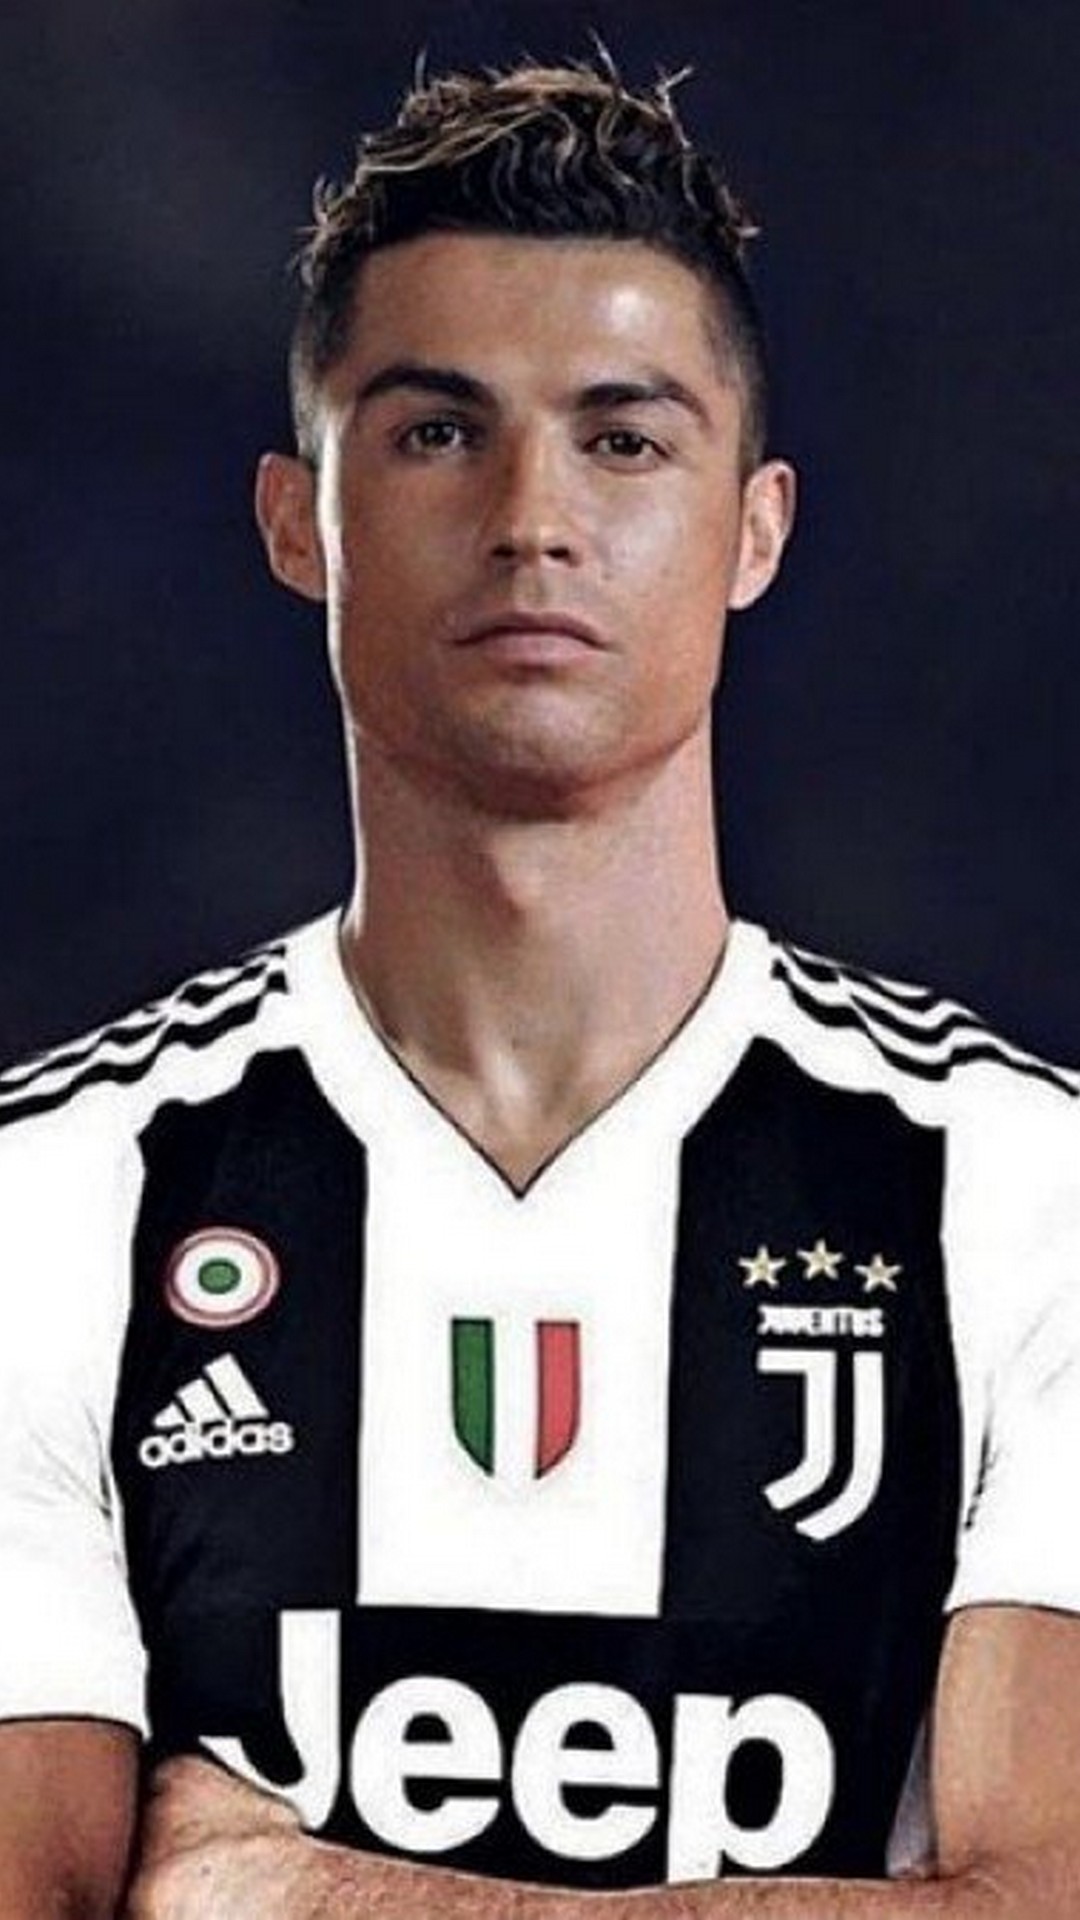 Wallpaper CR7 Juventus iPhone with resolution 1080X1920 pixel. You can make this wallpaper for your iPhone 5, 6, 7, 8, X backgrounds, Mobile Screensaver, or iPad Lock Screen